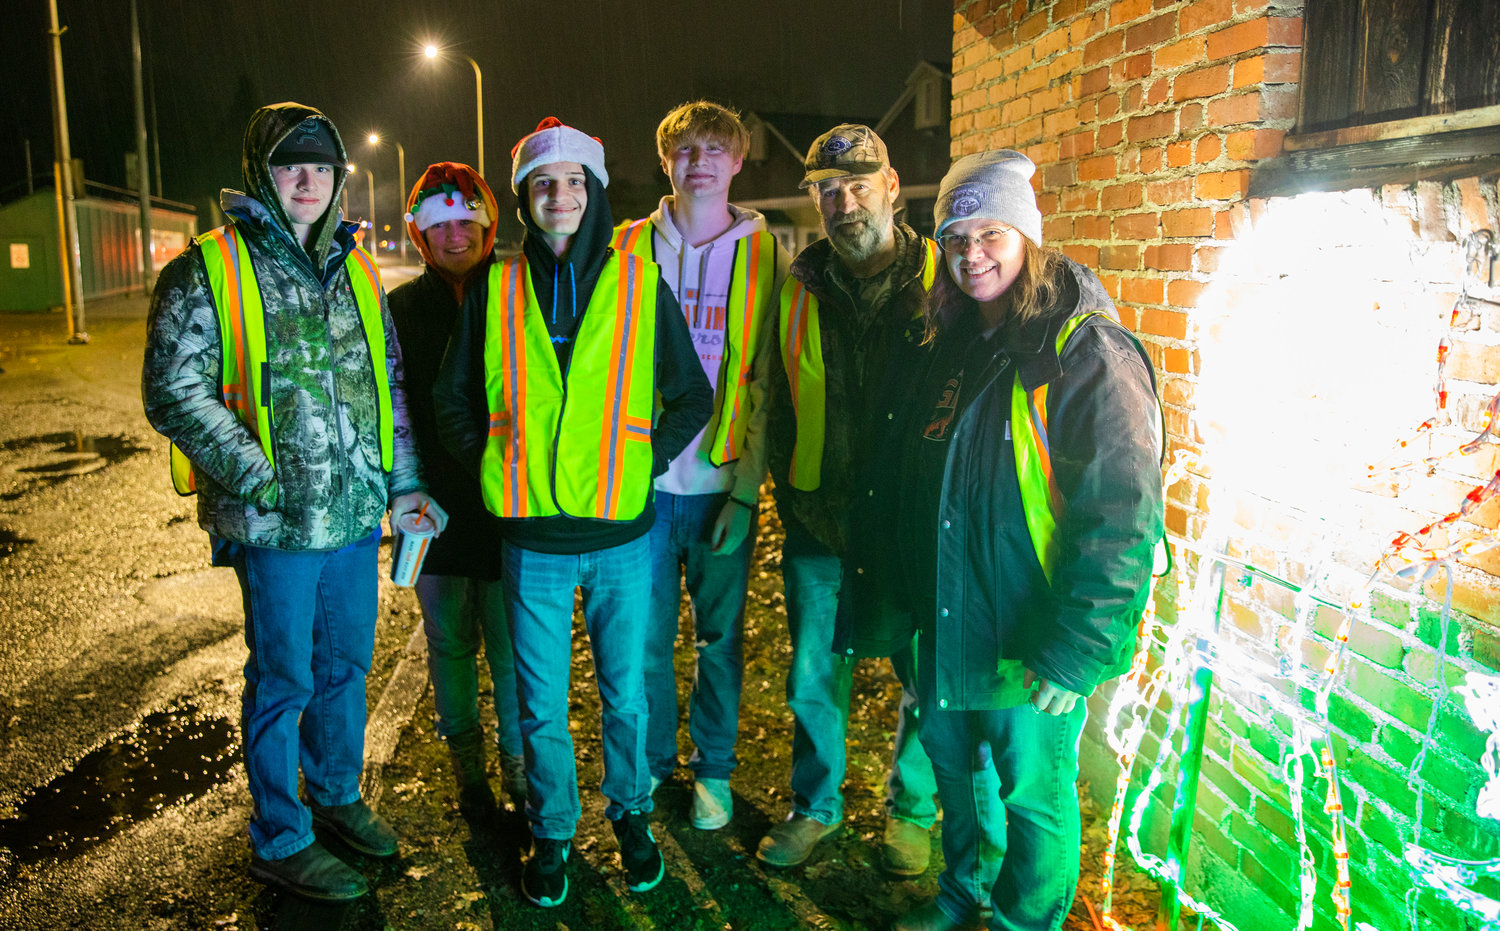 Volunteers smile for a photo at the entrance of the Borst Park Christmas lights display Thursday night in Centralia.